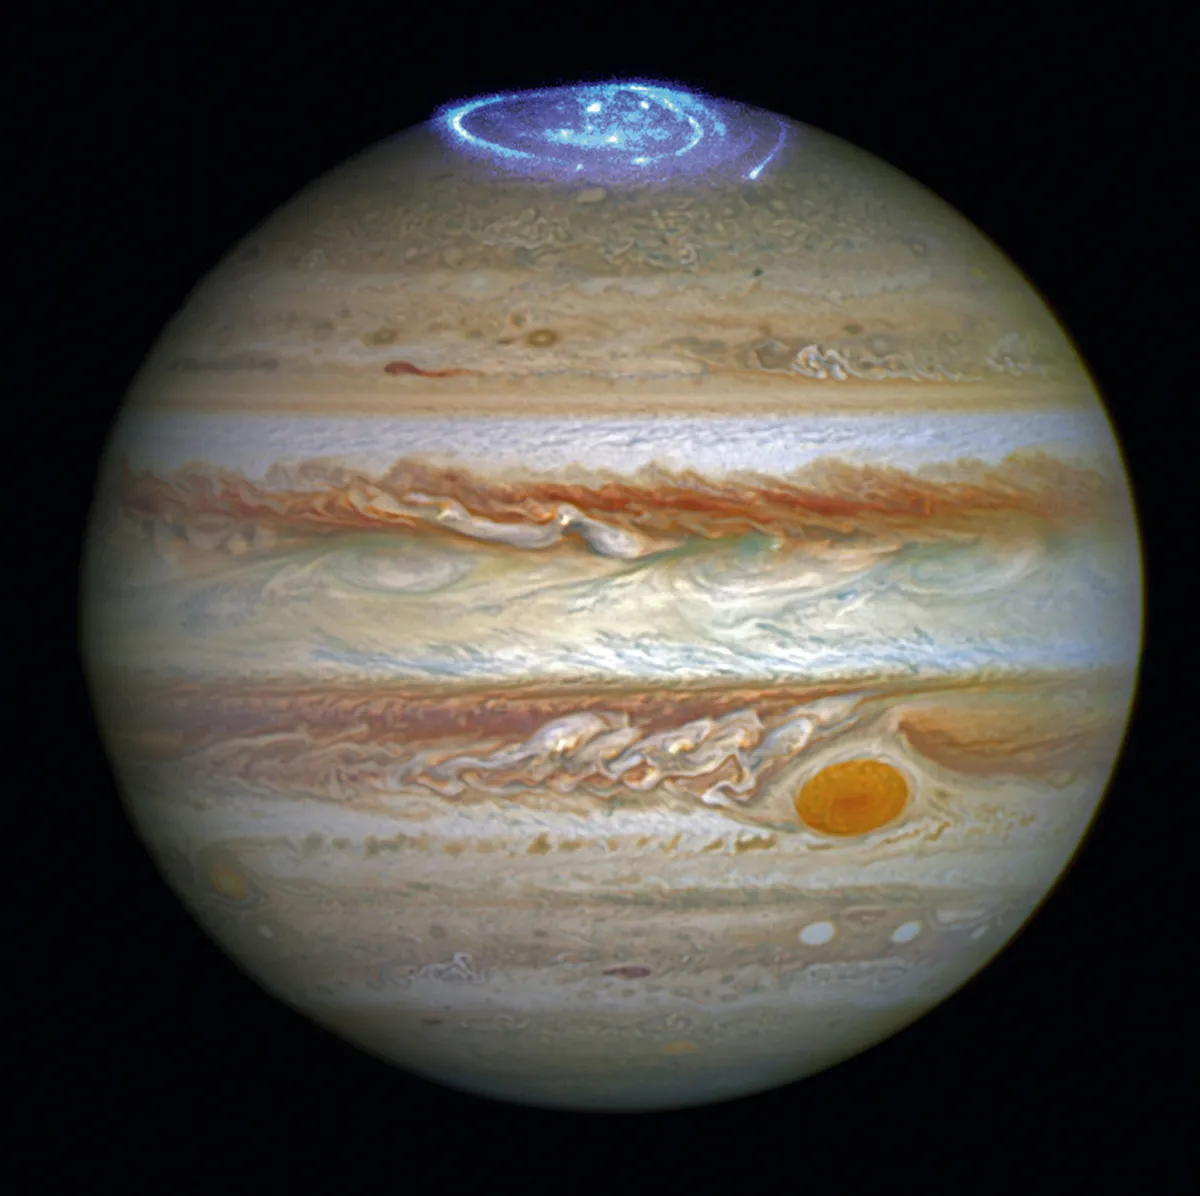 Vivid auroras in Jupiter’s atmosphere captured by the Hubble Space Telescope.